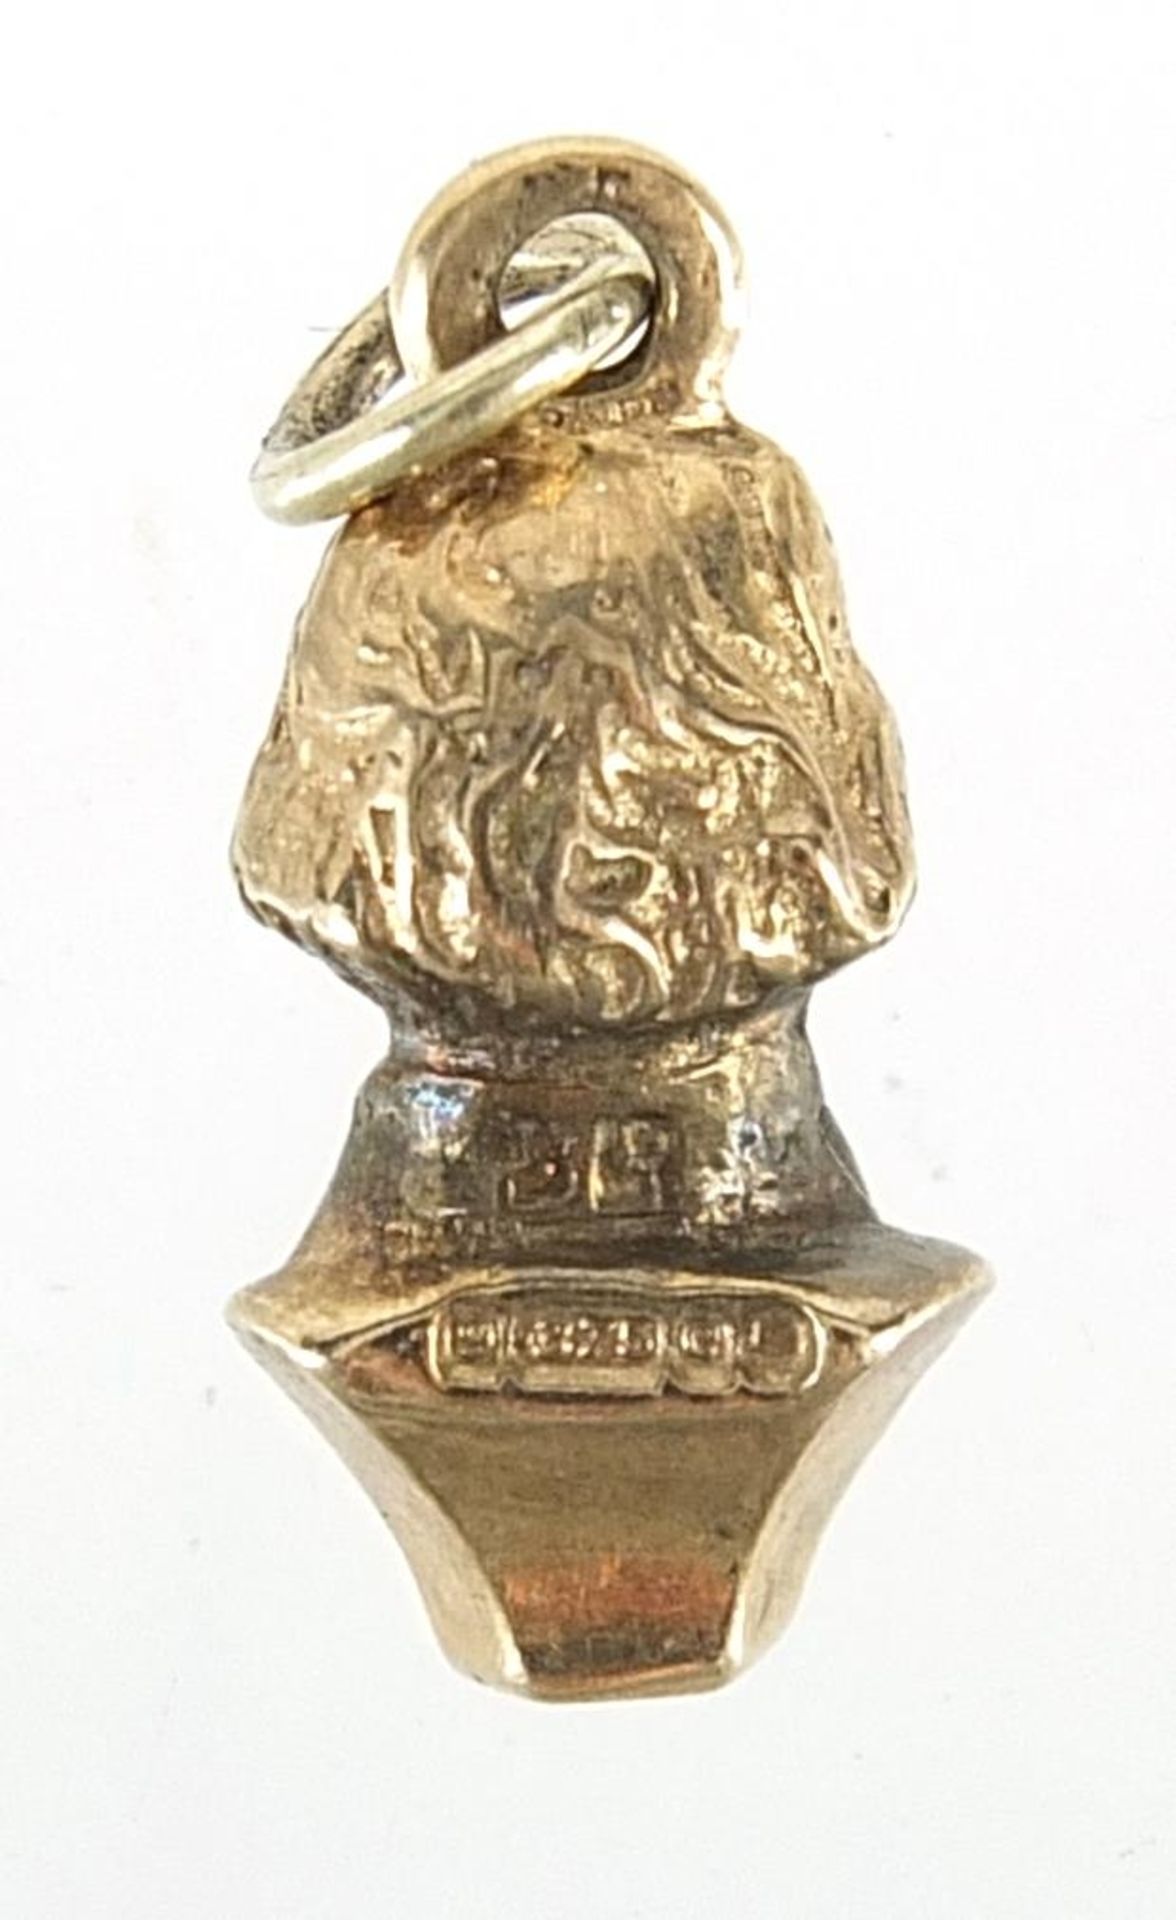 9ct gold Shakespeare bust charm, 1.6cm high, 2.3g - Image 3 of 3